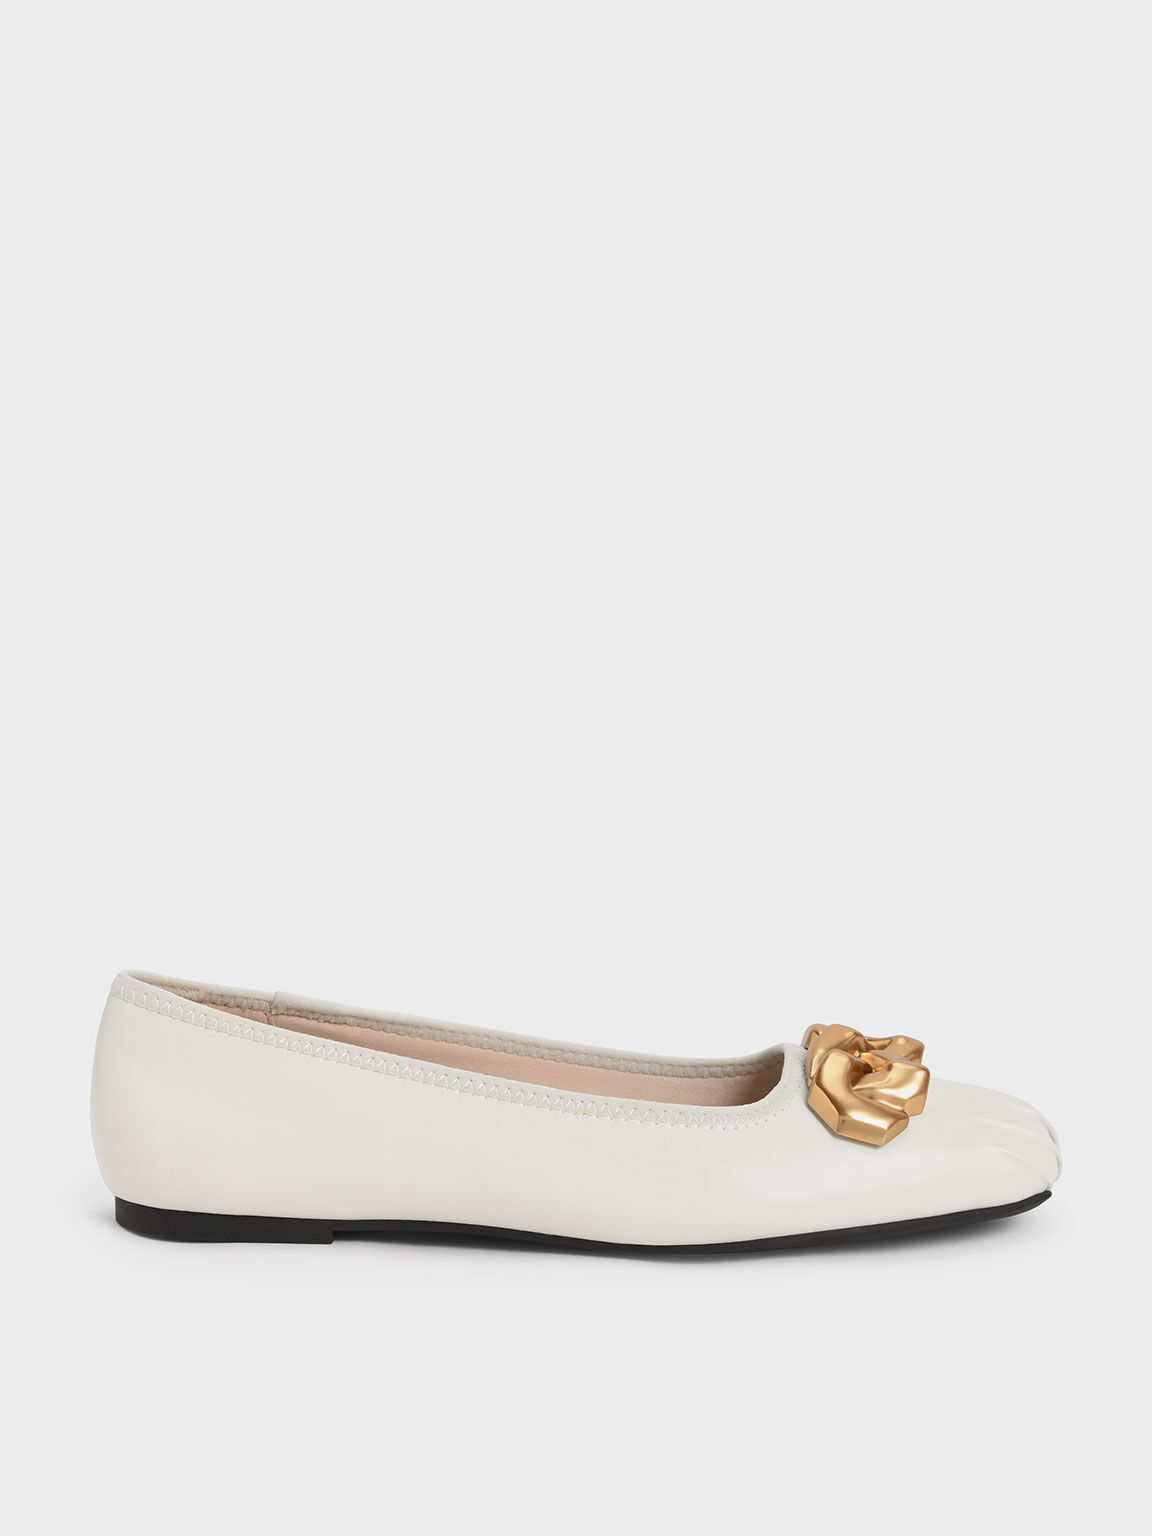 Ruched Square-Toe Chunky Chain-Link Ballerinas, Chalk, hi-res